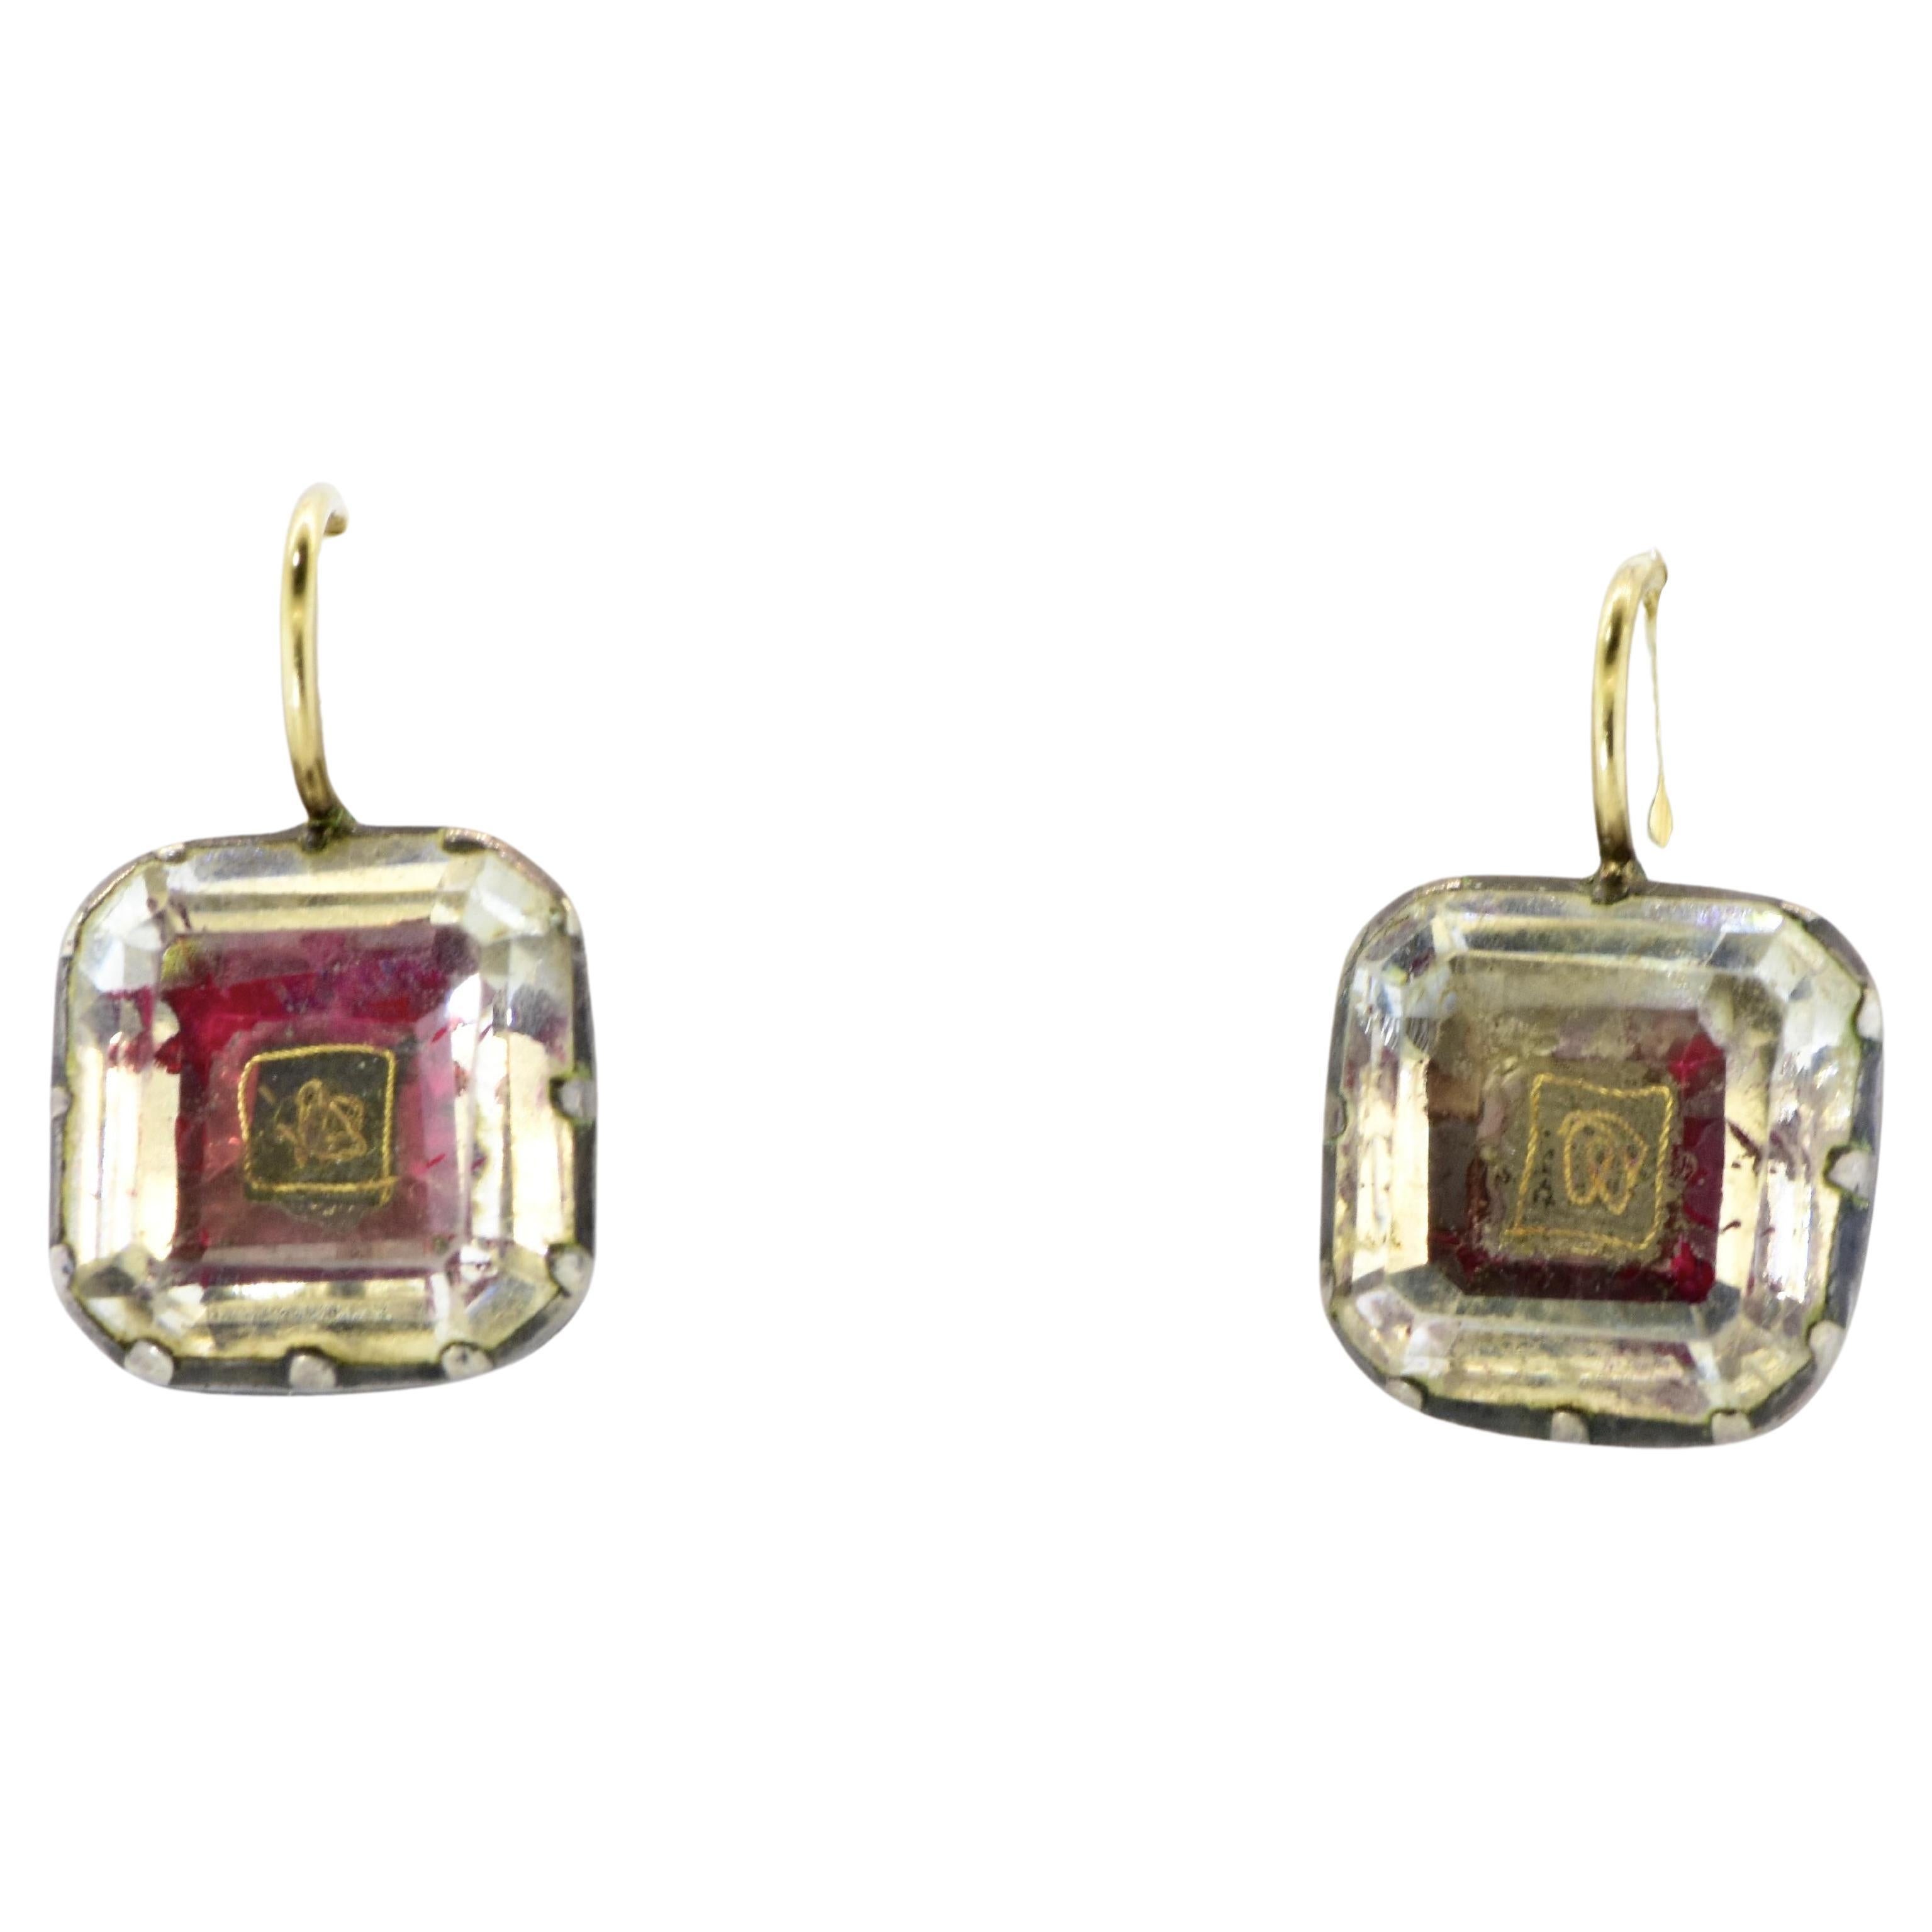 Stuart Crystal silver and gold earrings, c. 1650, Georgian, (King George the Second).  These Stuart Crystals, square cut with soft corners, are set in silver with gold wire -which were probably updated and replaced more than 125 years ago.  The